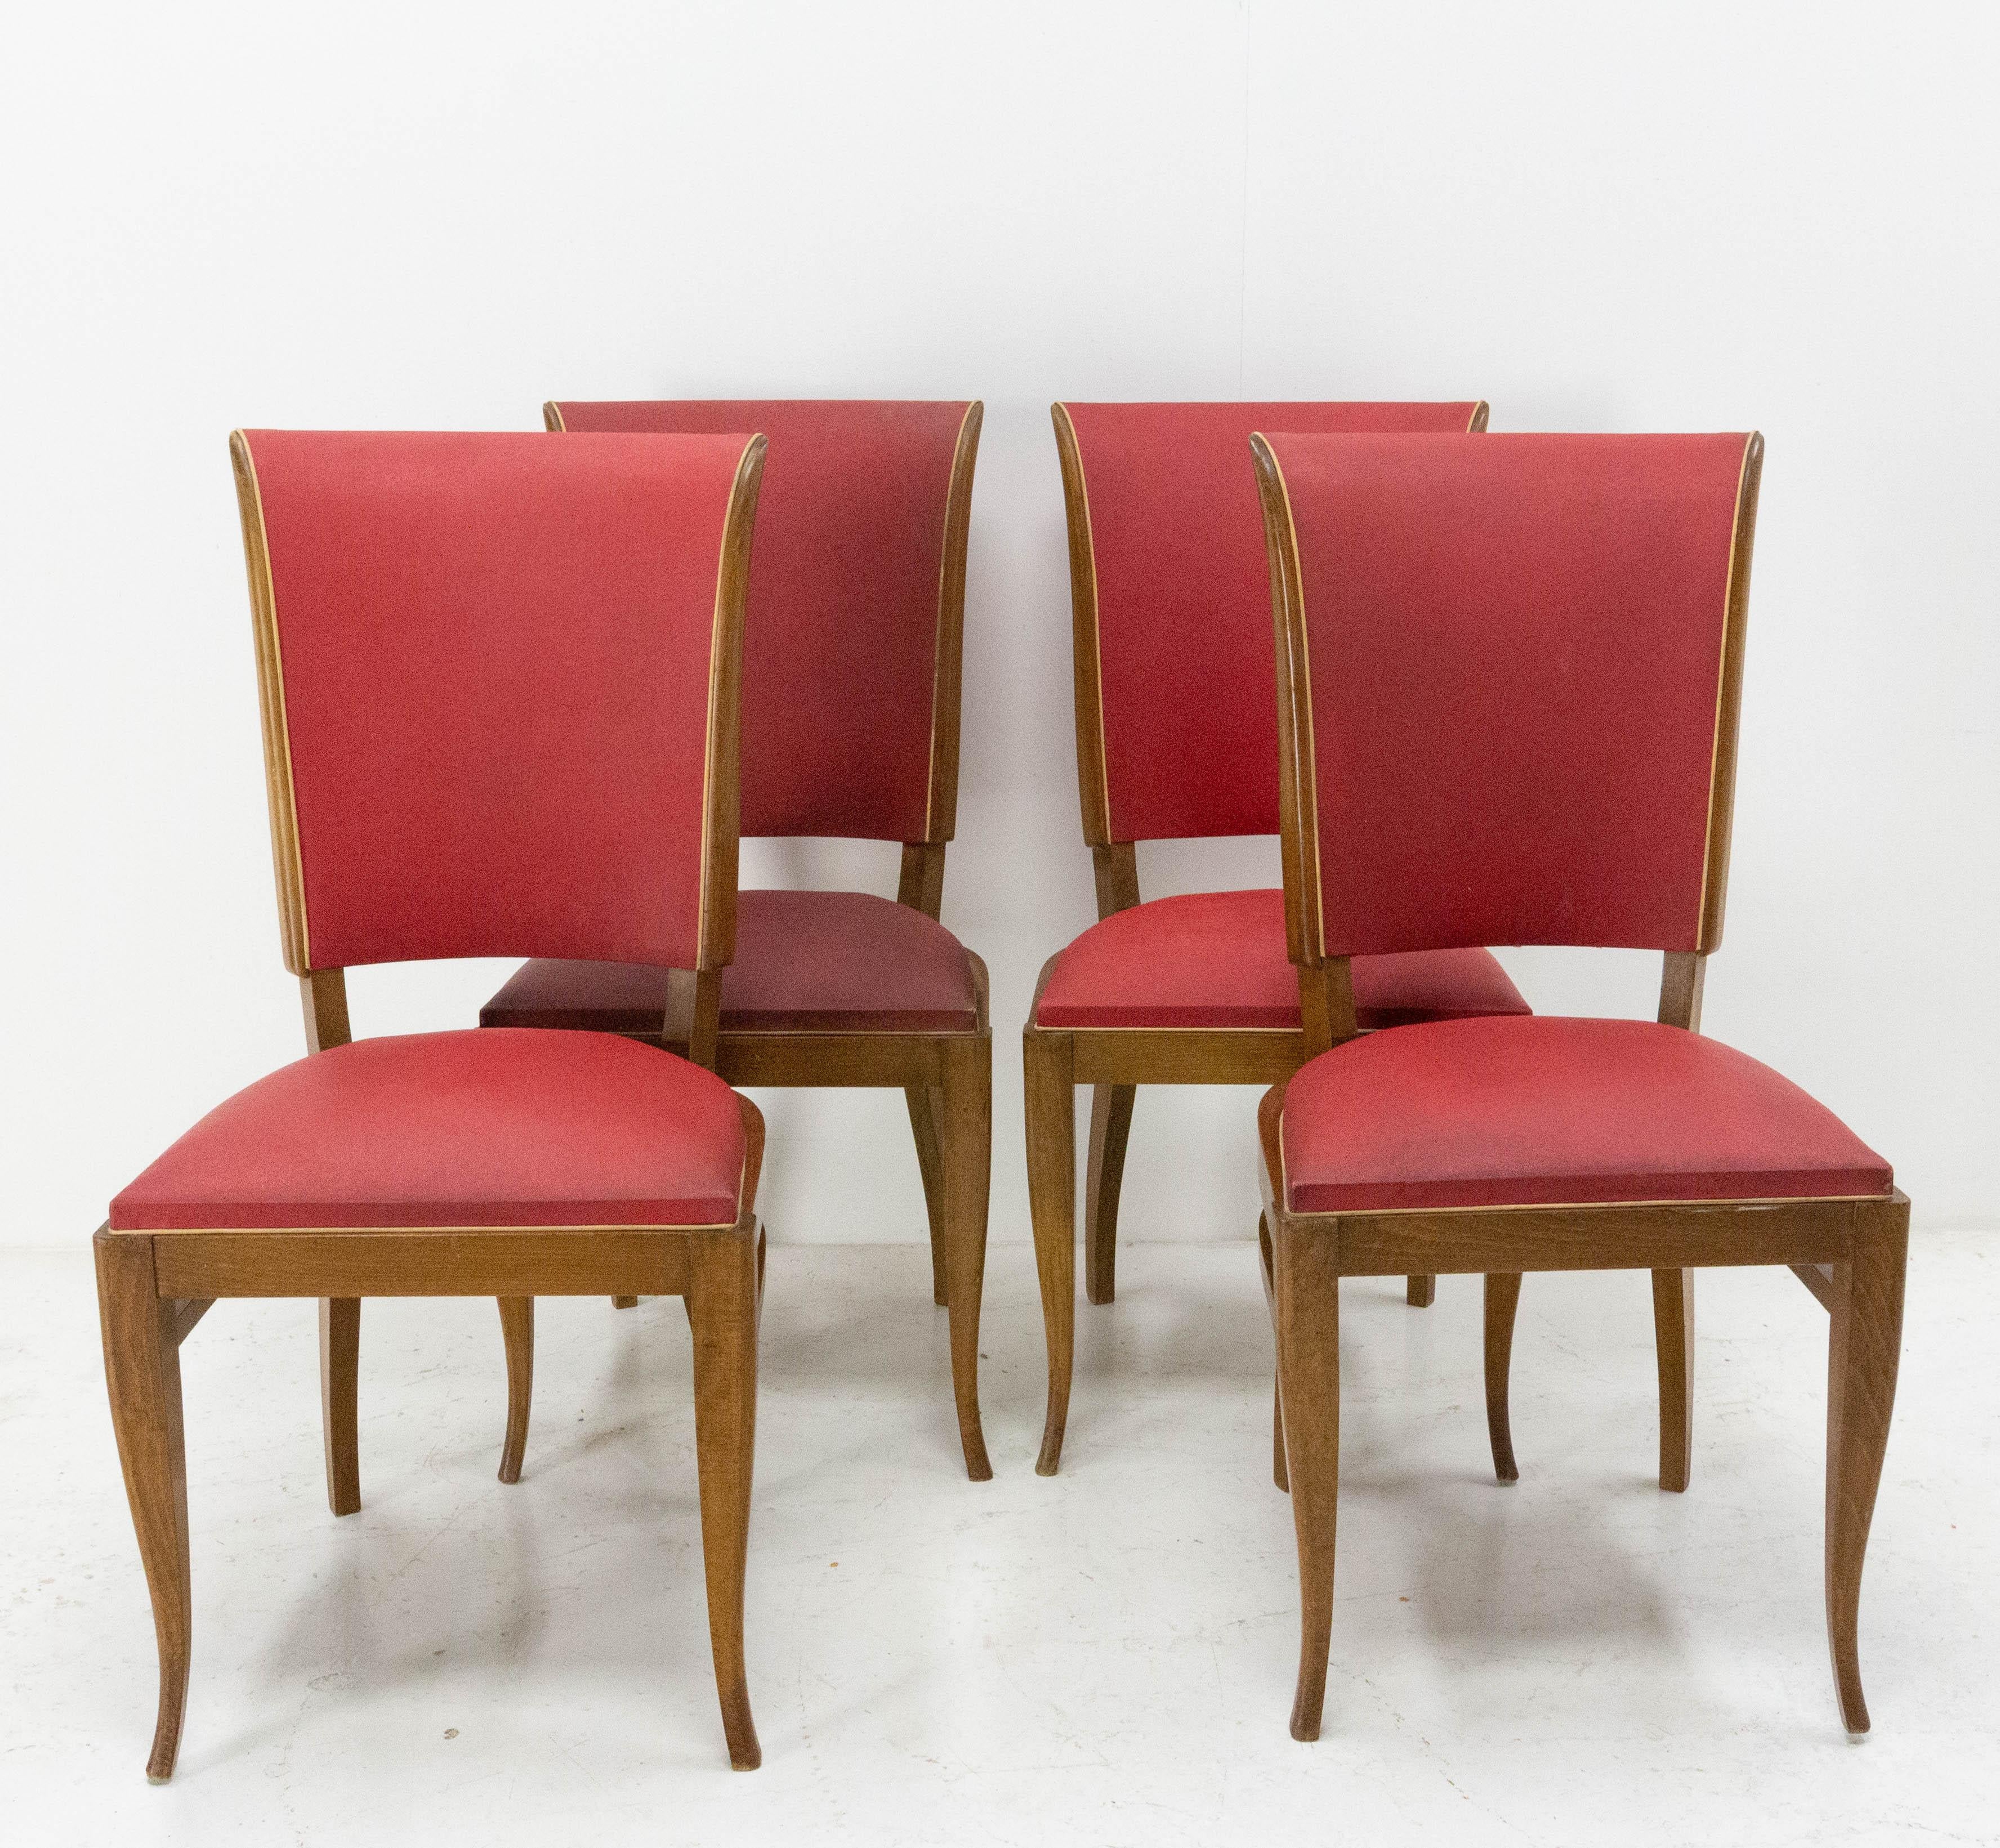 Four French dining chairs, midcentury
Beech and moleskin 
Sound and solid.

Shipping: 
2 packs, L70 P47 H95 14 kg each.